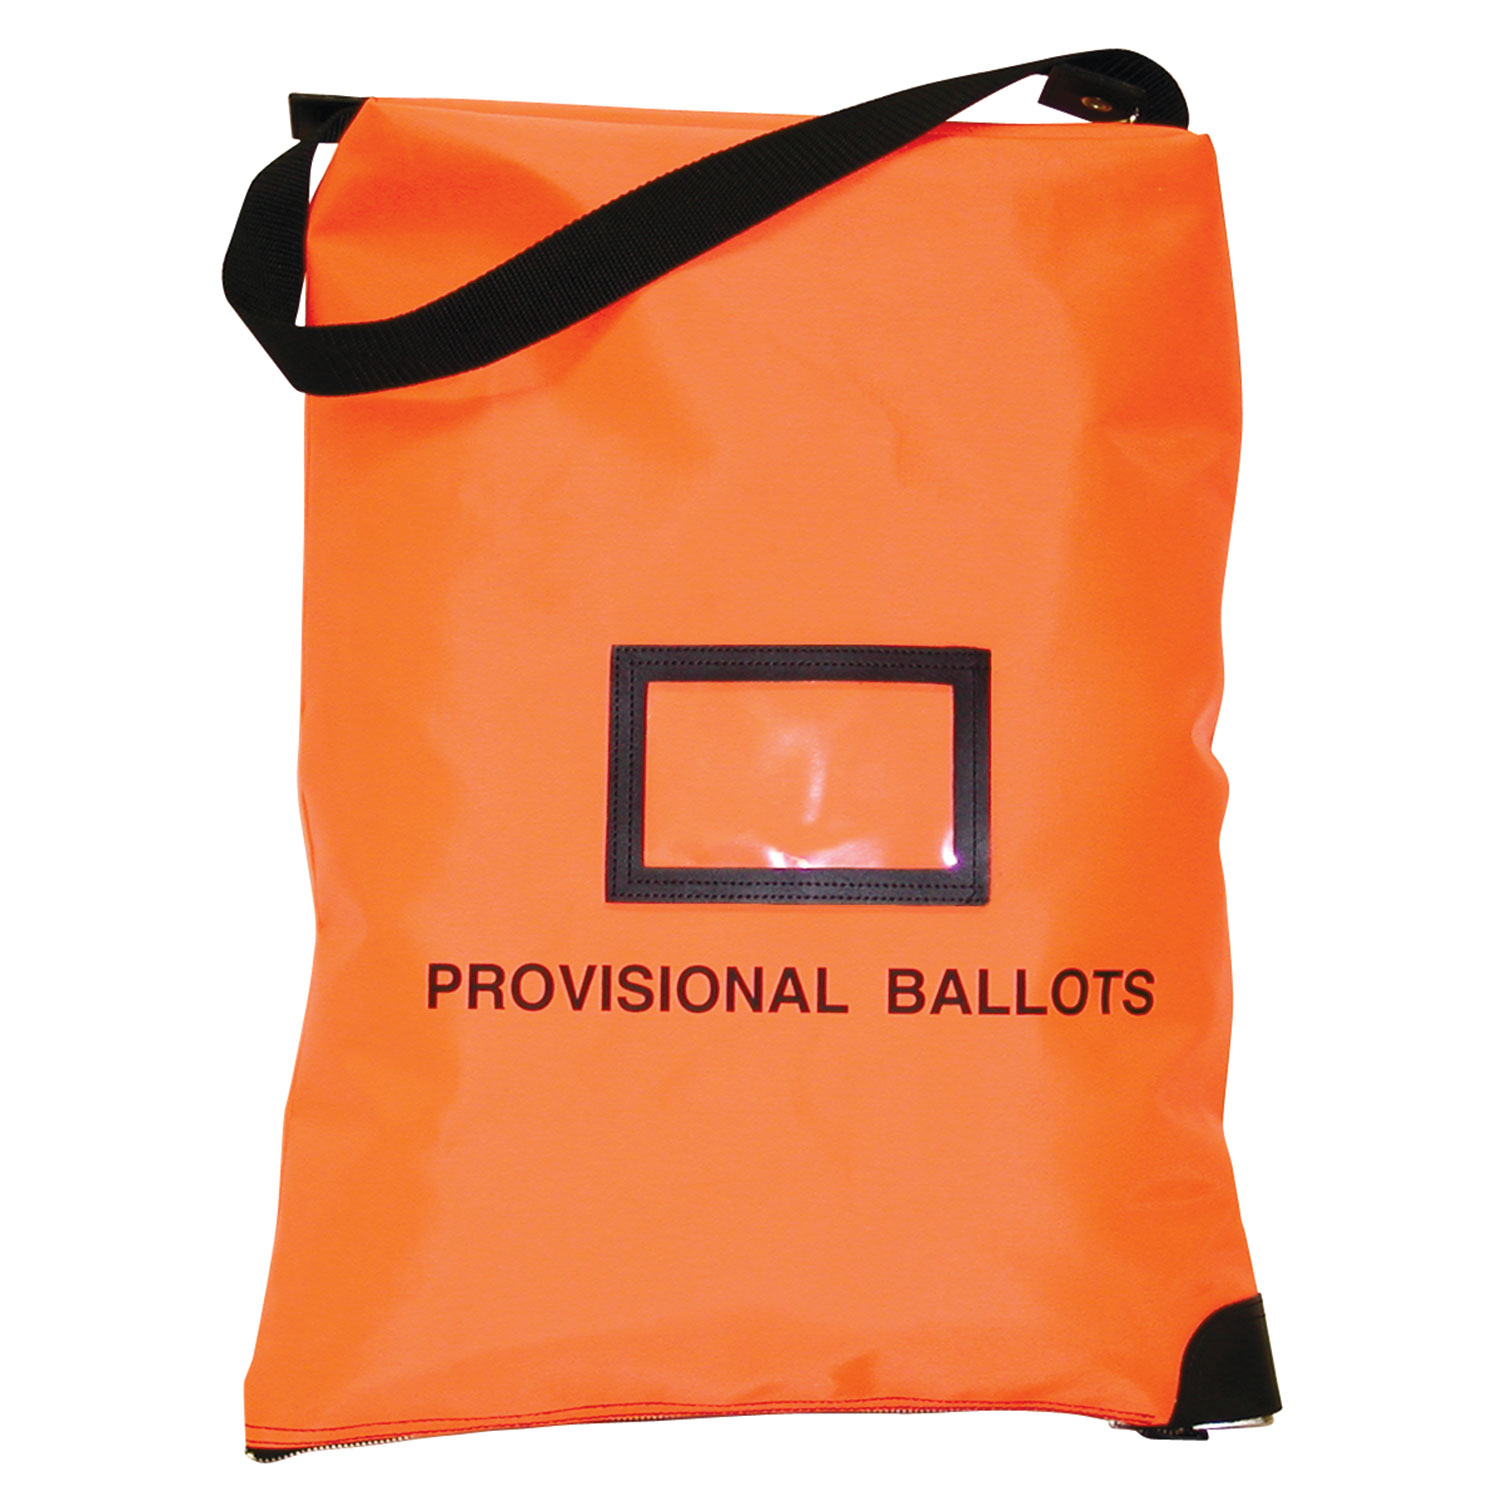 Hanging-Ballot-Bags-with-Arcolock-7